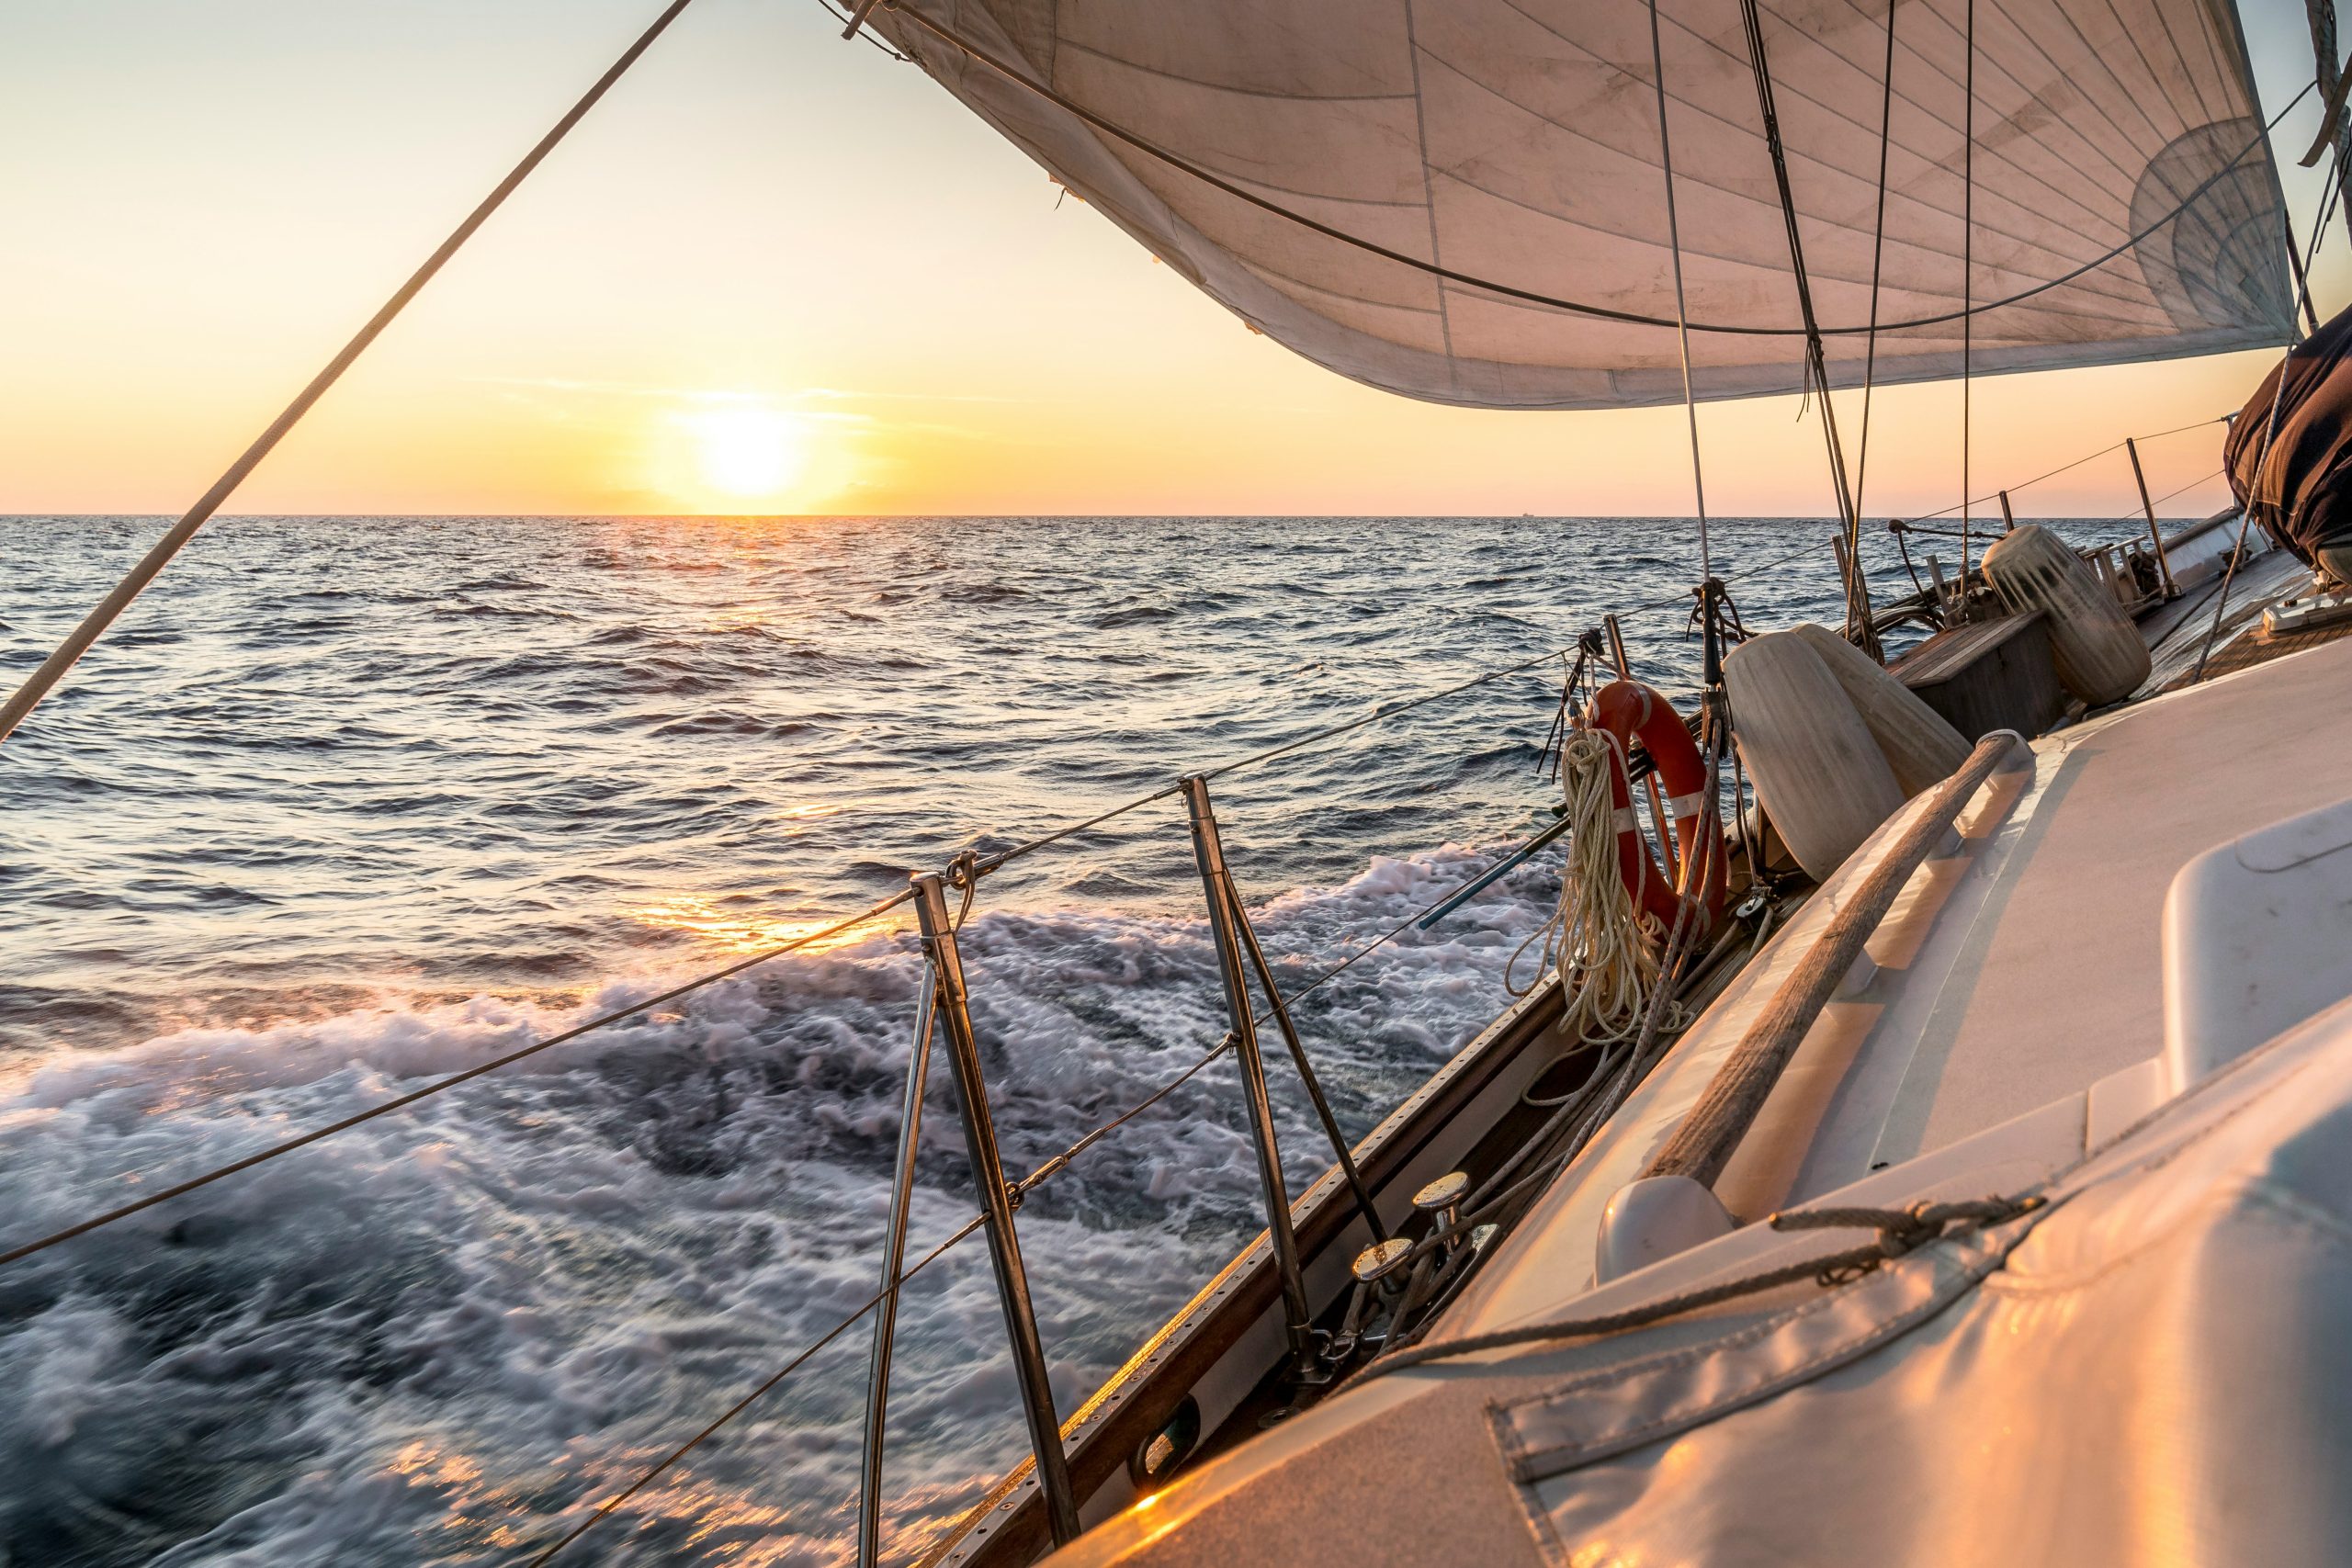 explore the world of sailing with our expert guides and resources. learn about different sailing techniques, equipment, and destinations for your next adventure on the water.